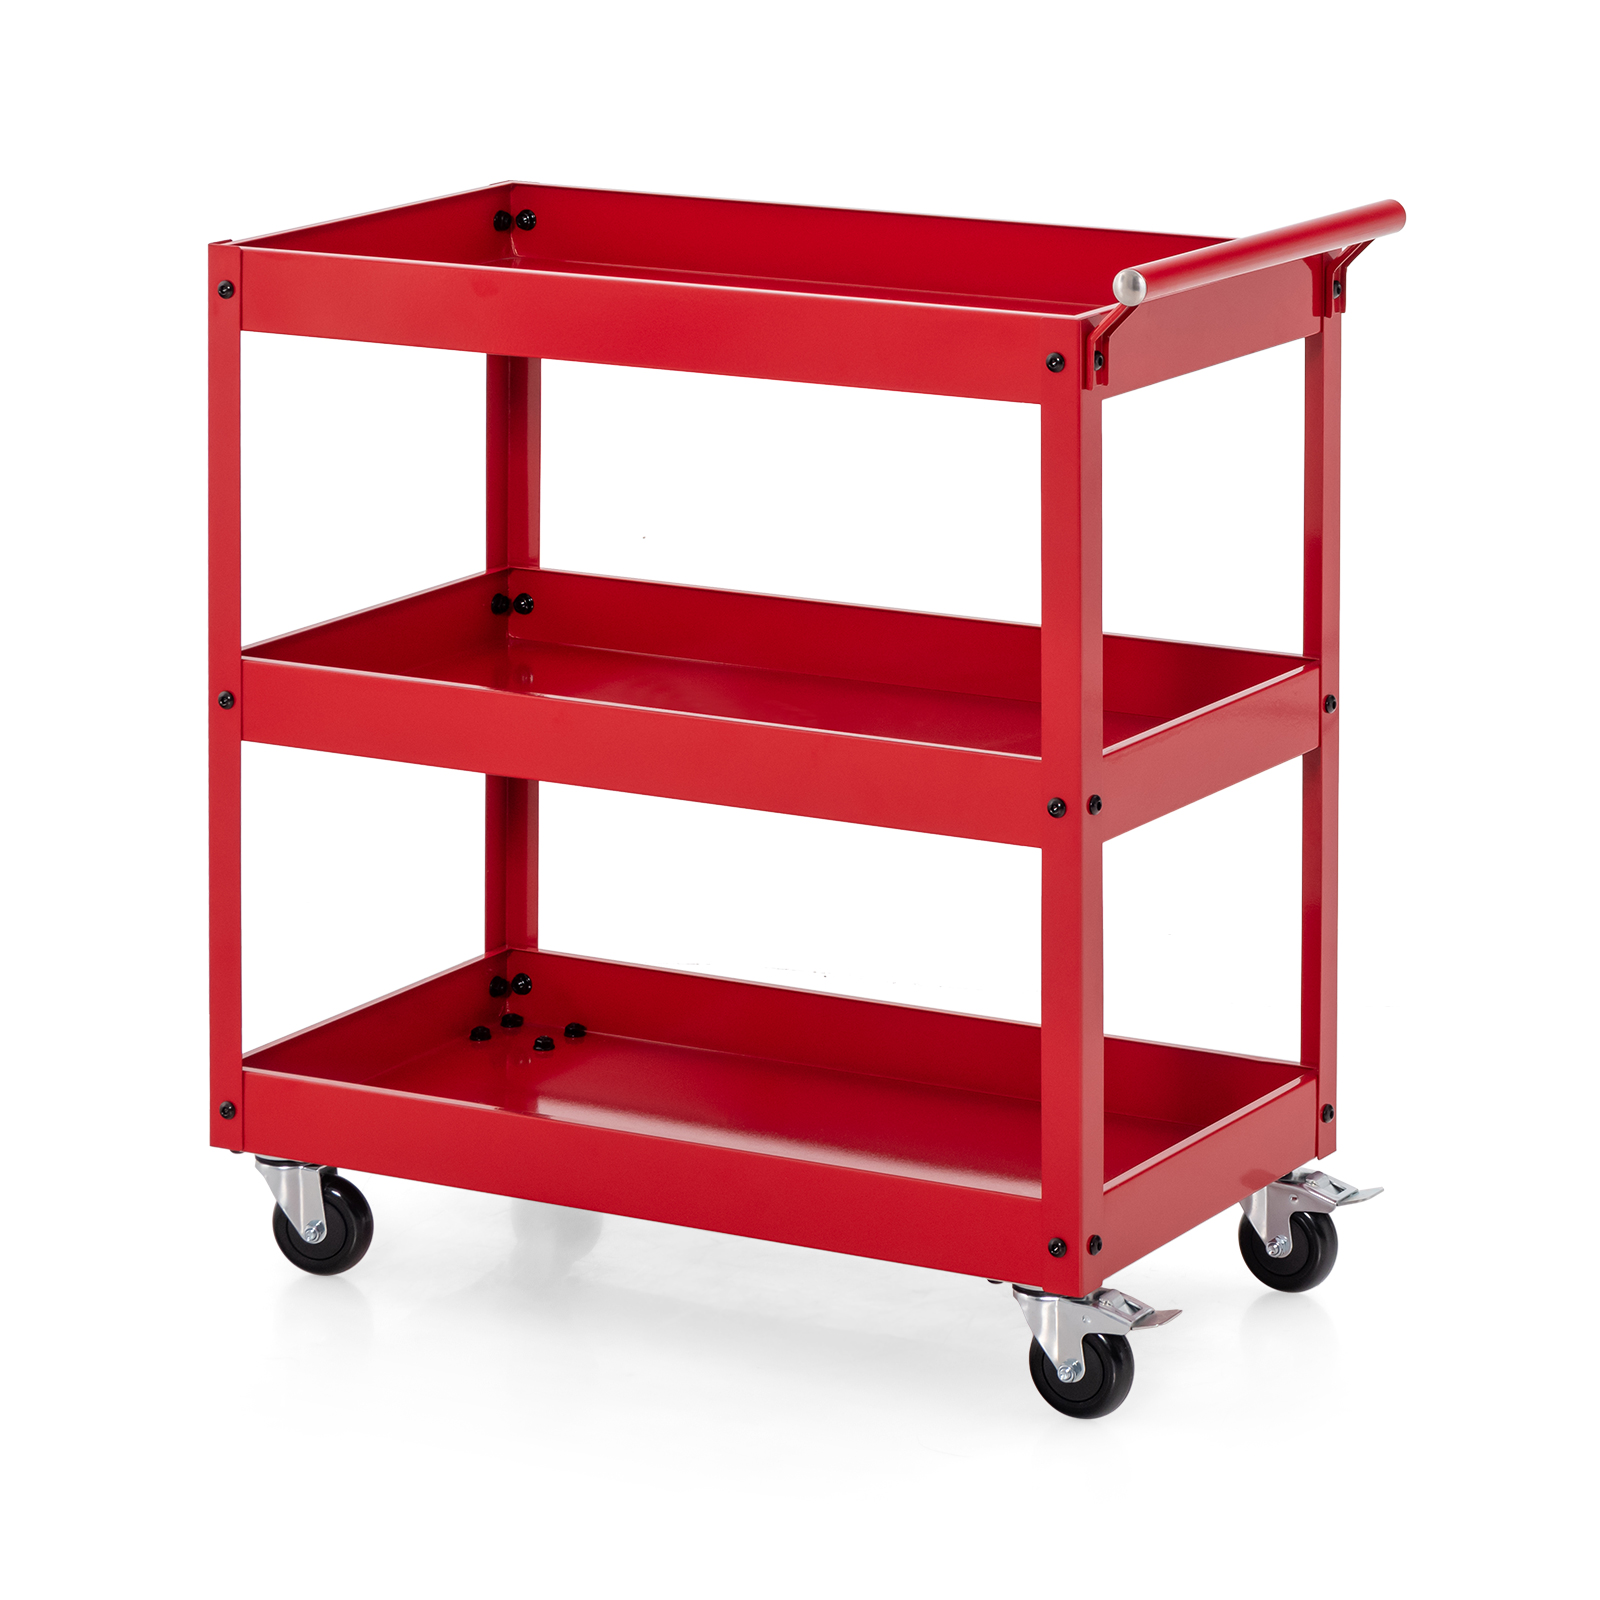 3 Shelf Rolling Metal Utility Cart with Ergonomic Handle-Red